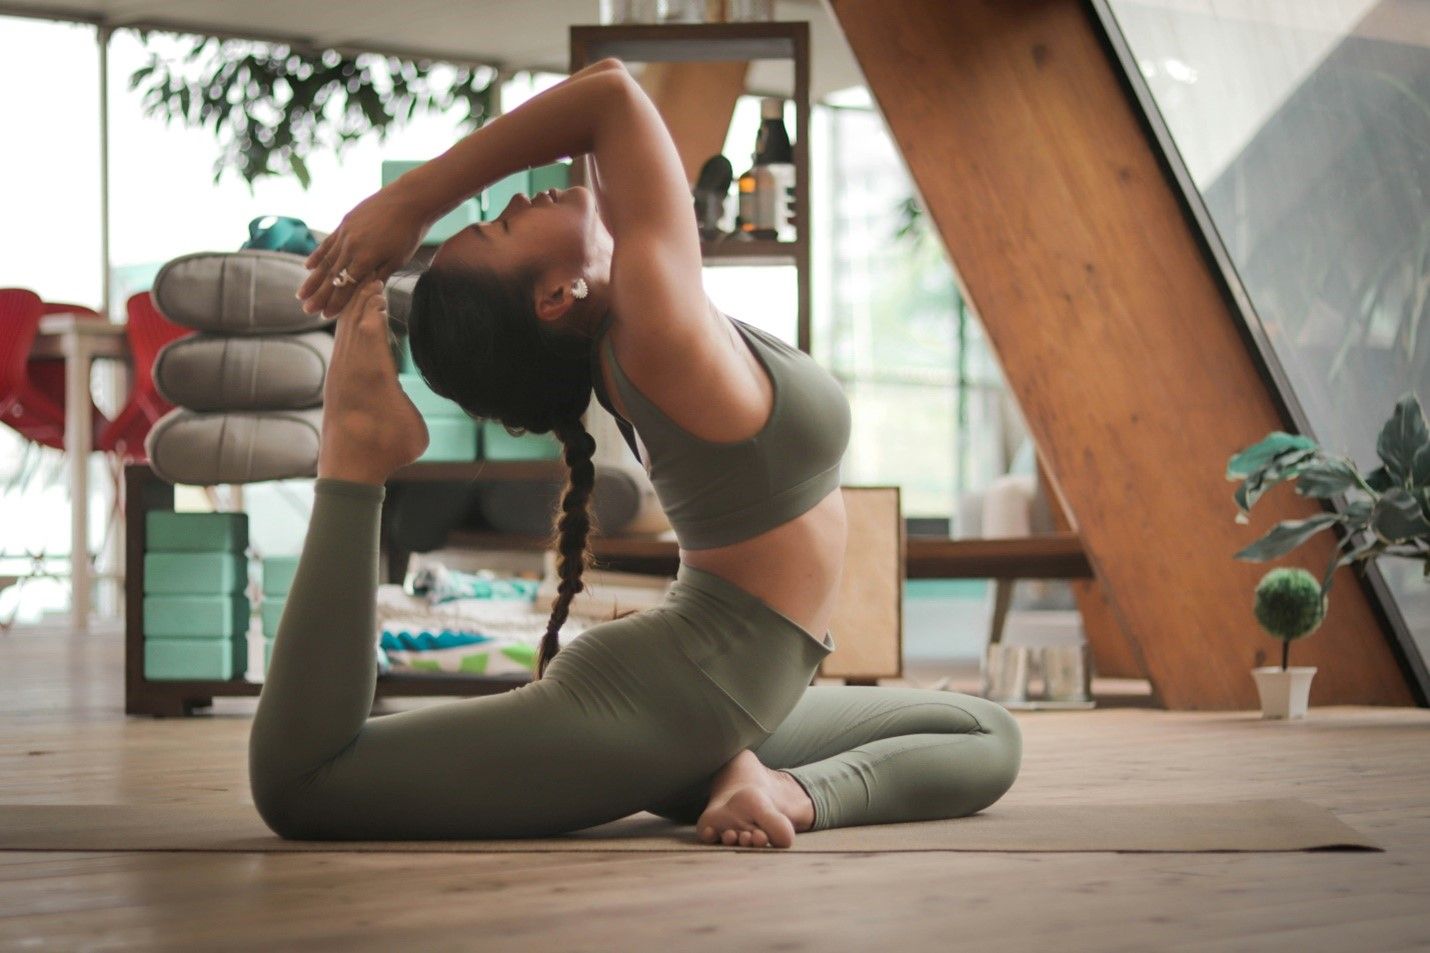 A woman is doing yoga on a mat in a living room.